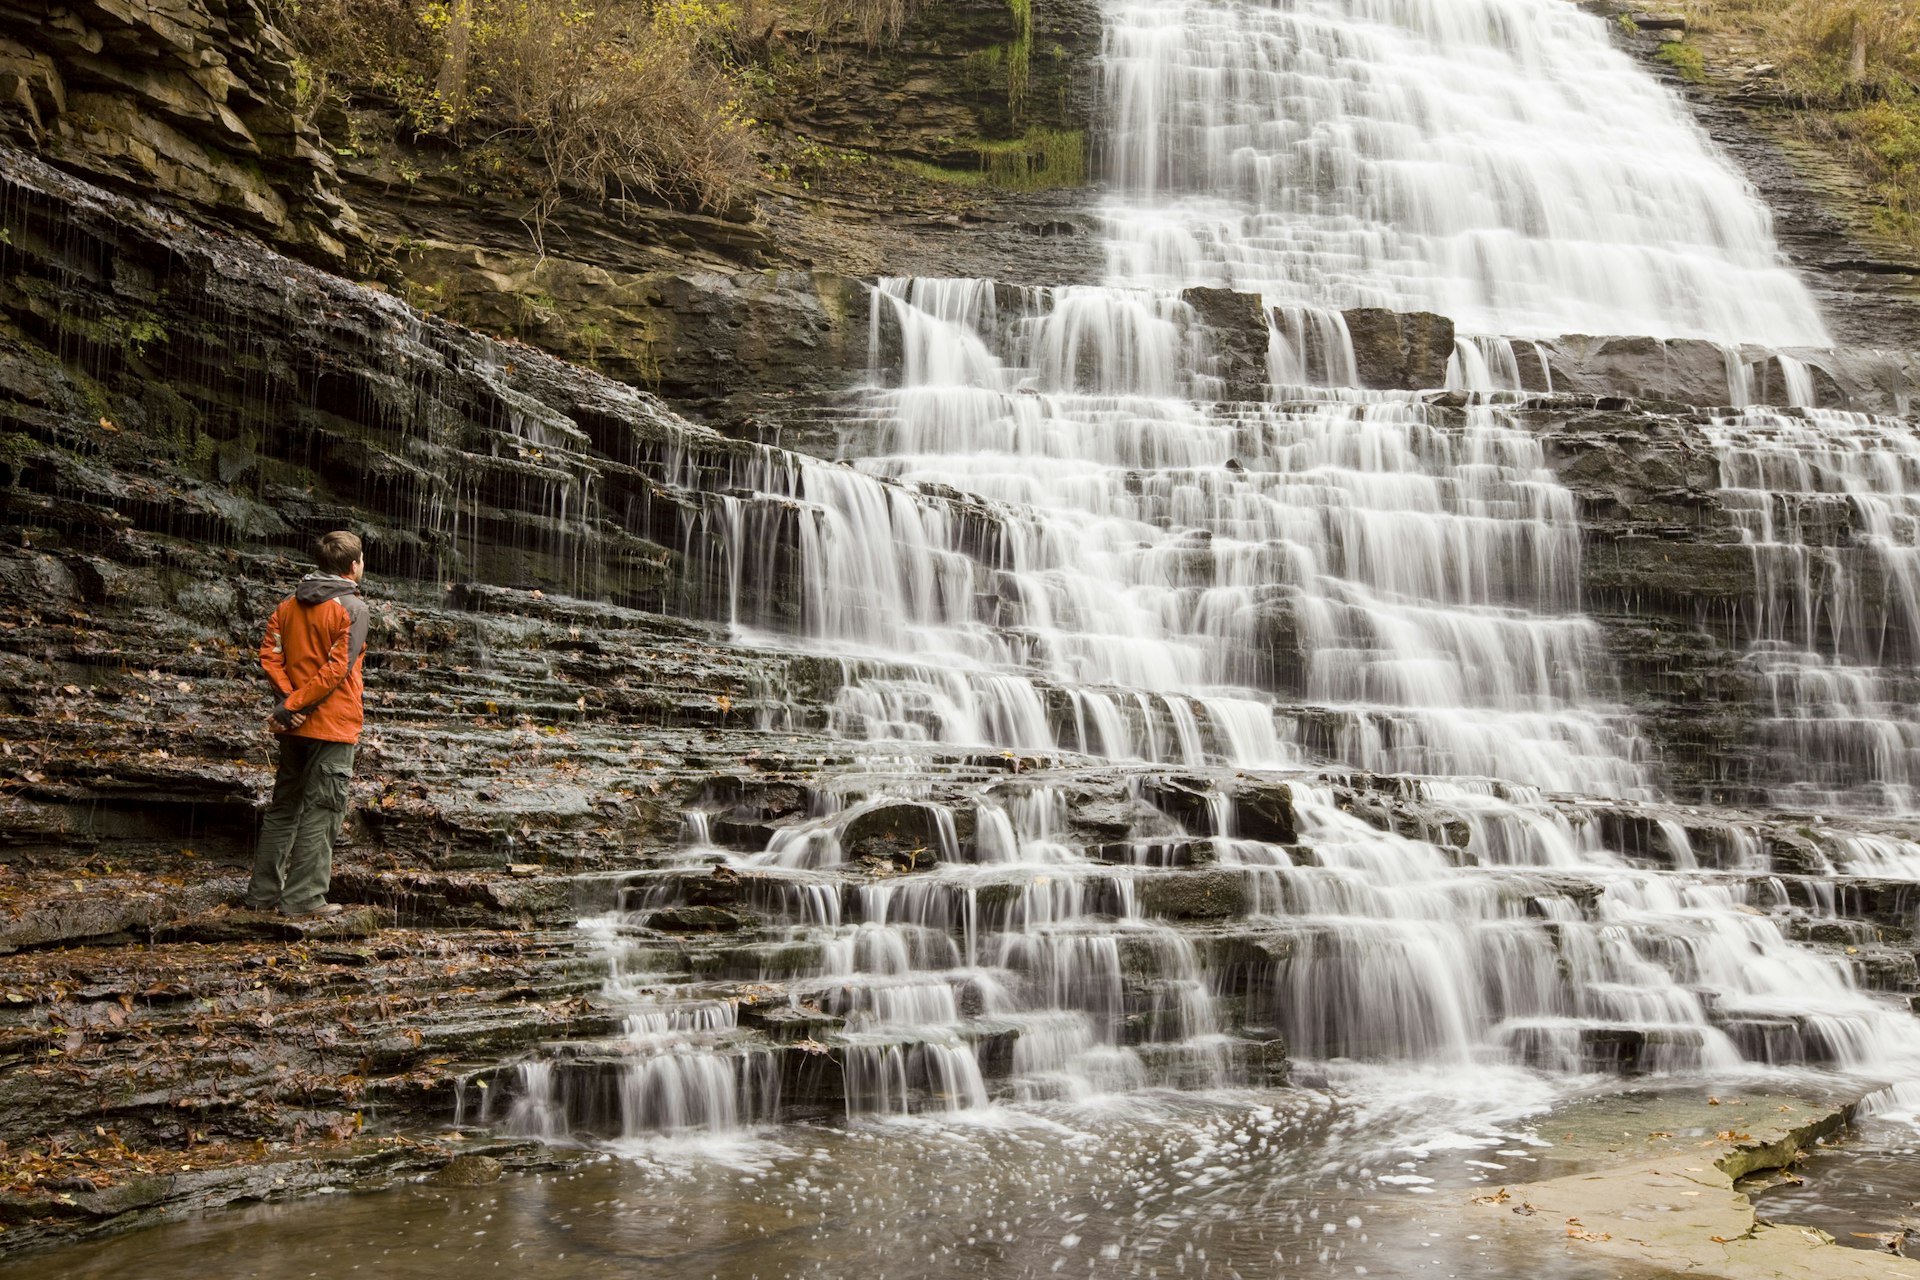 A hiker stands next to a cascade that is splashing off tiered rocks